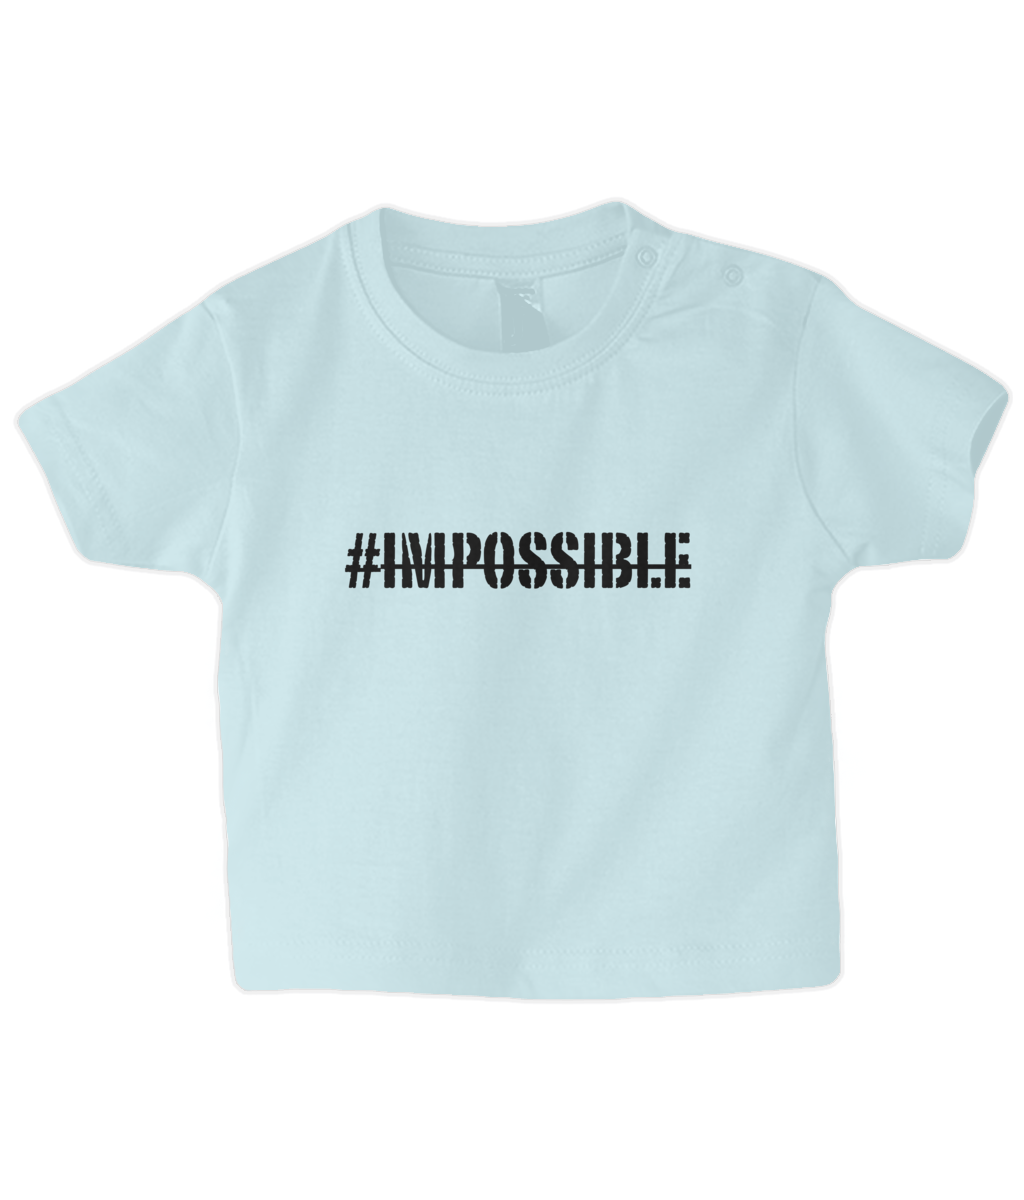 Impossible Baby T Shirt